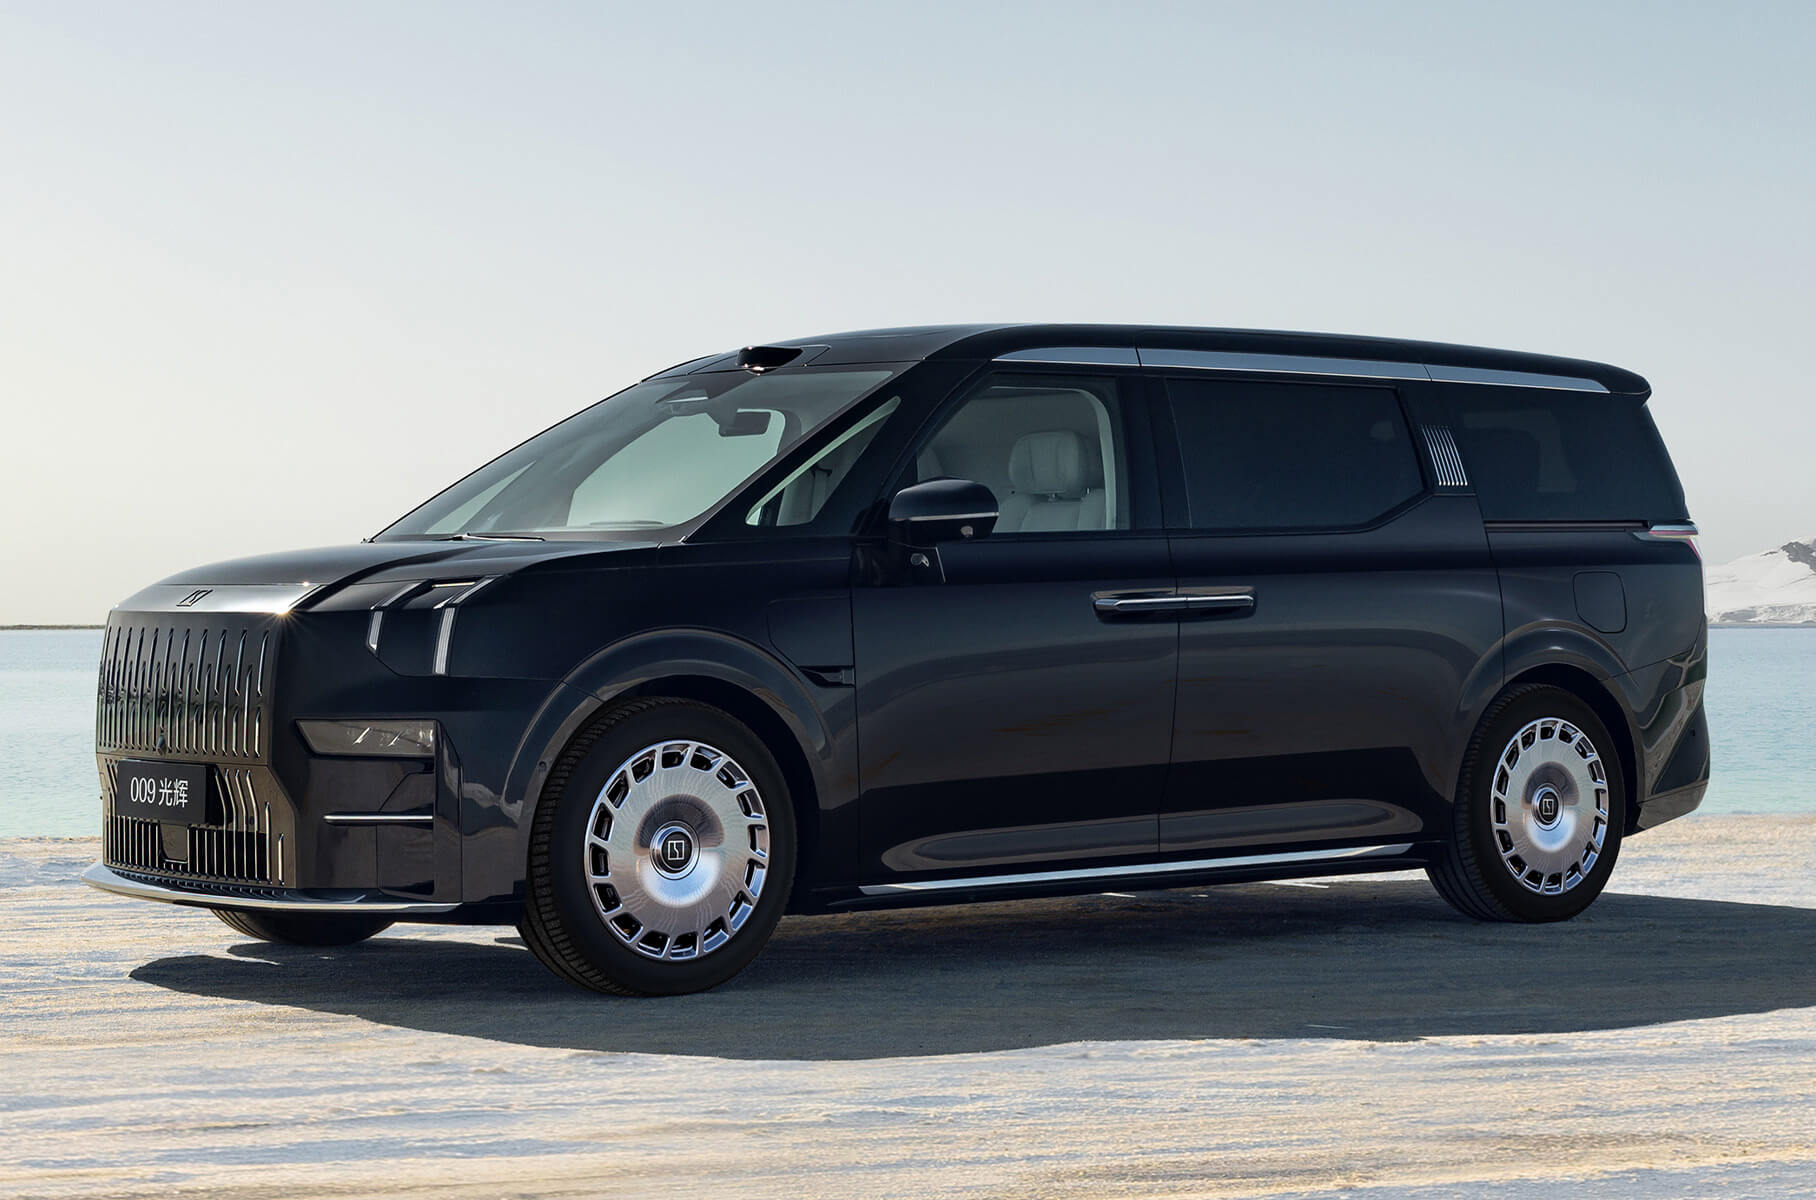 Everyone will sit down: new minivans from China